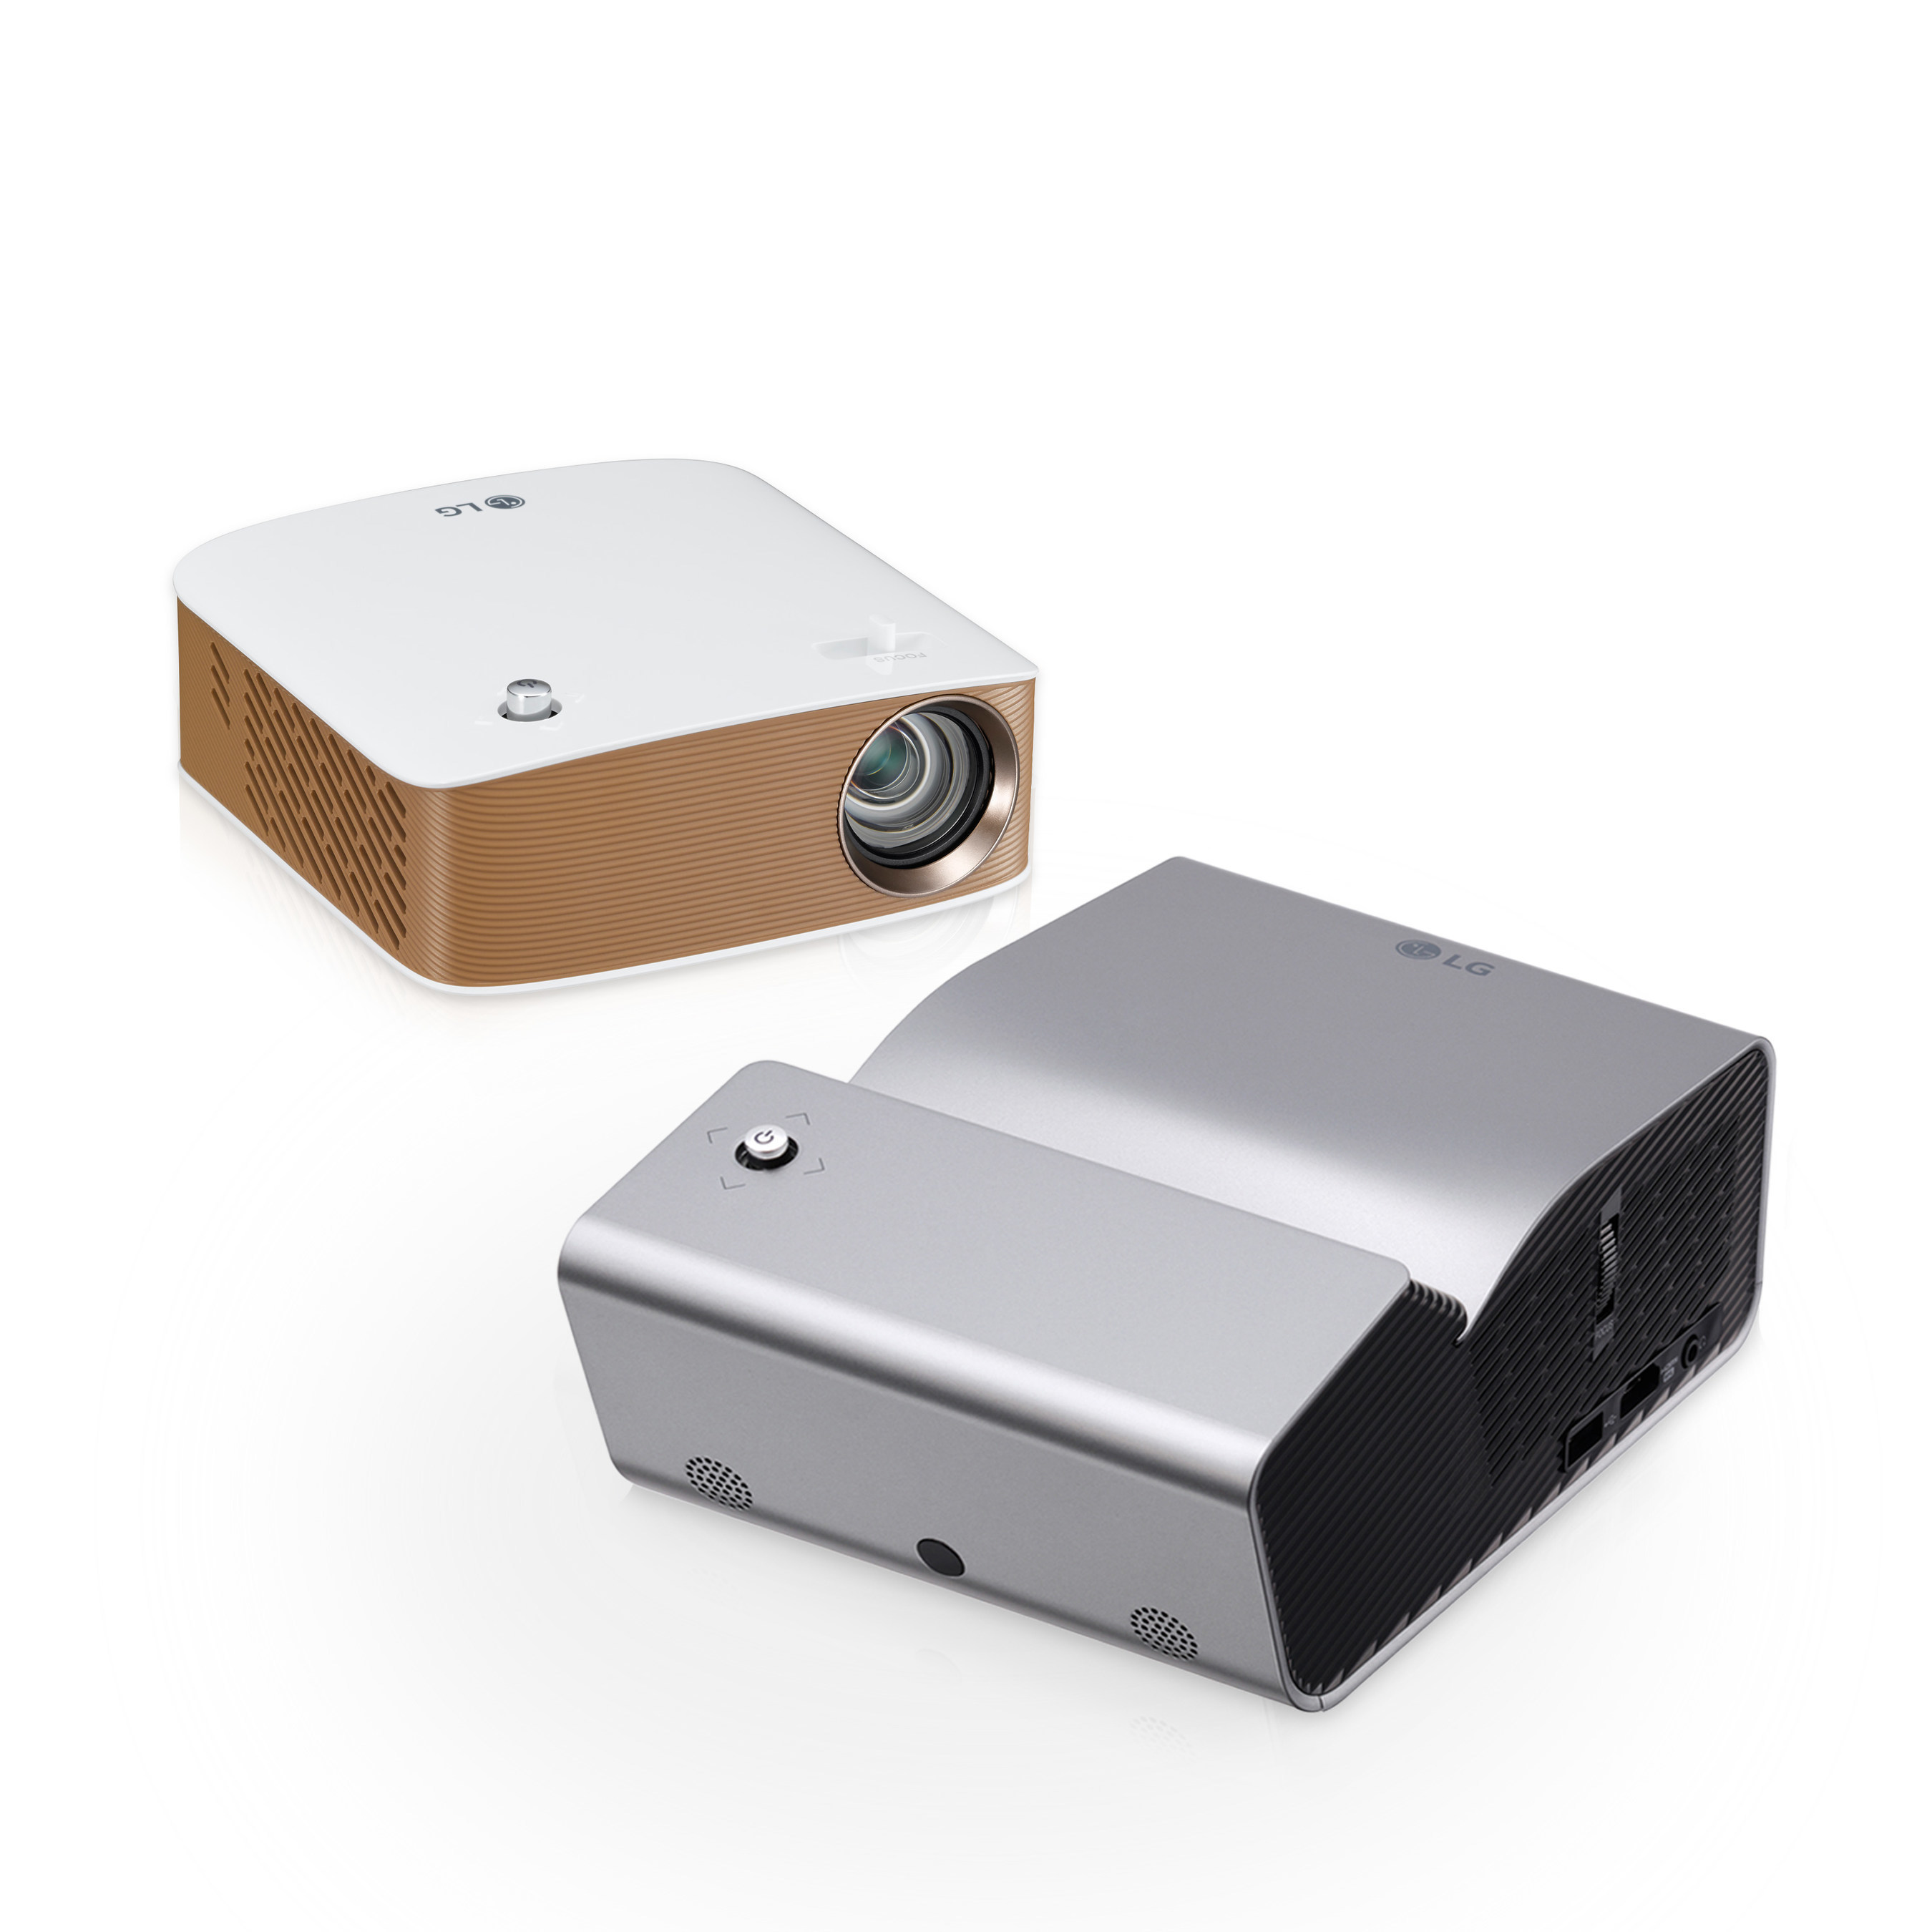 LG Electronics plans to expand its Minibeam(R) series of portable projectors.